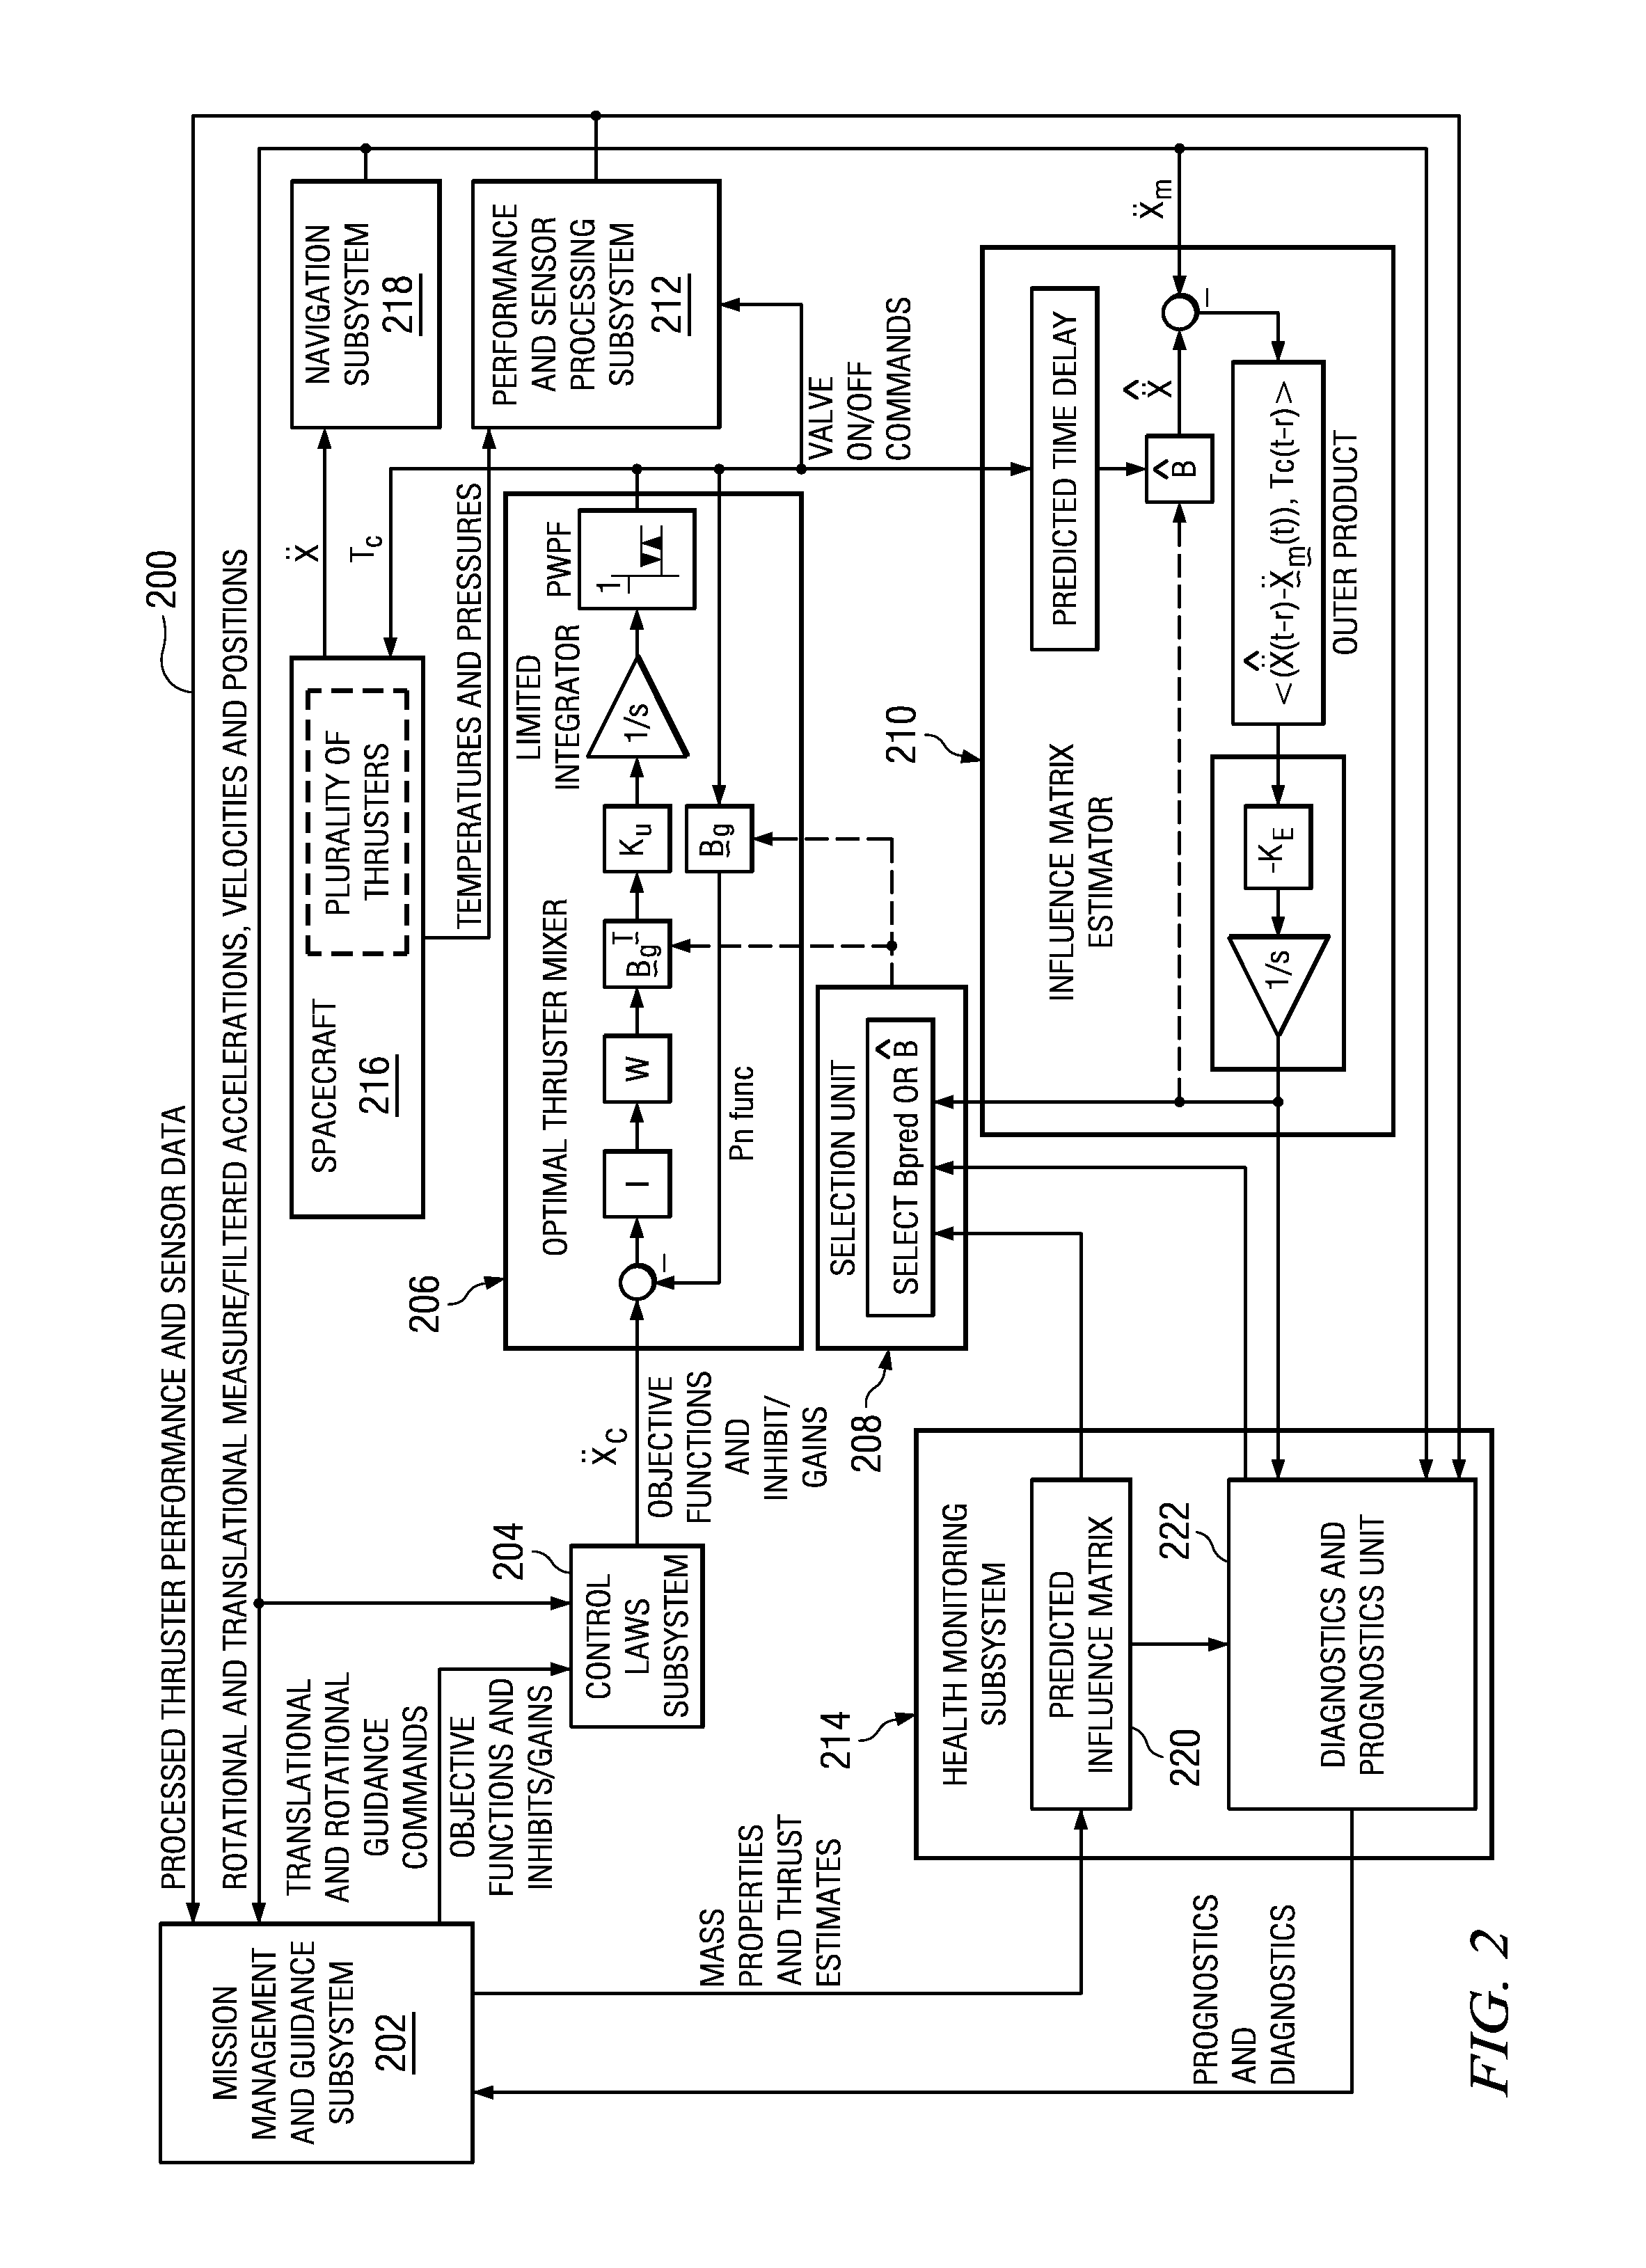 Health-Adaptive Reaction Control System